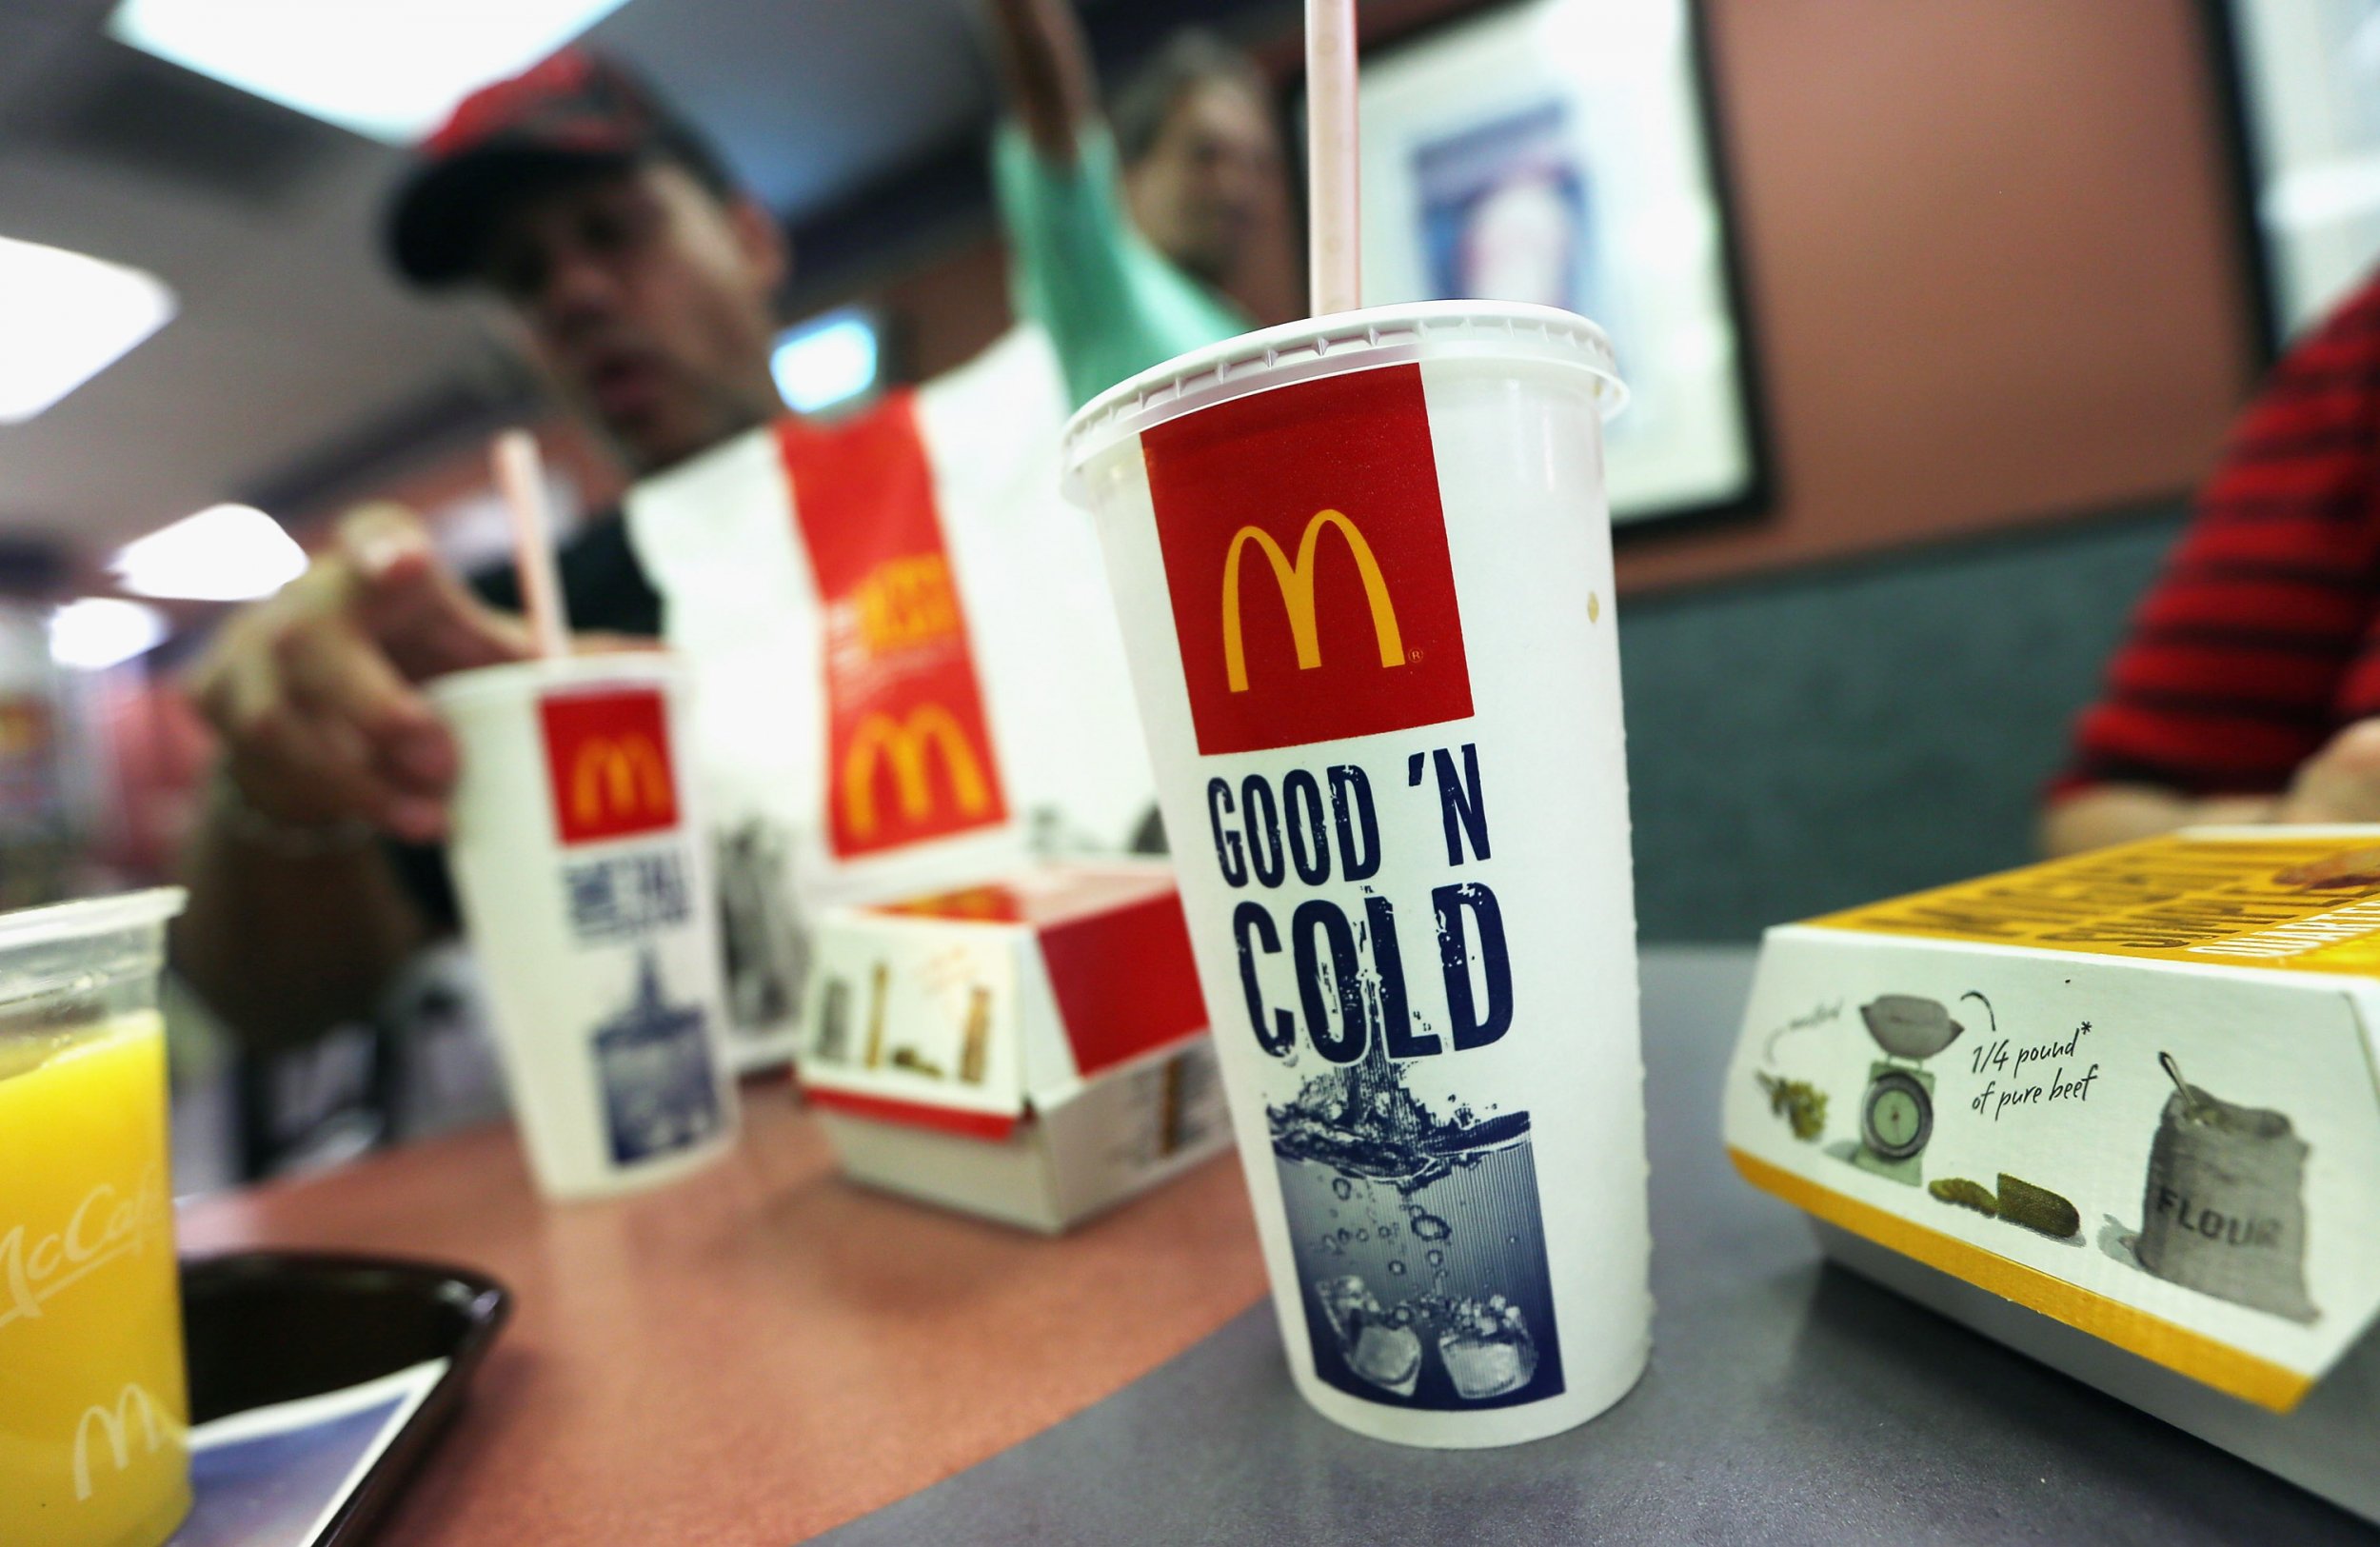 mcdonald's employee spiked officer's drink